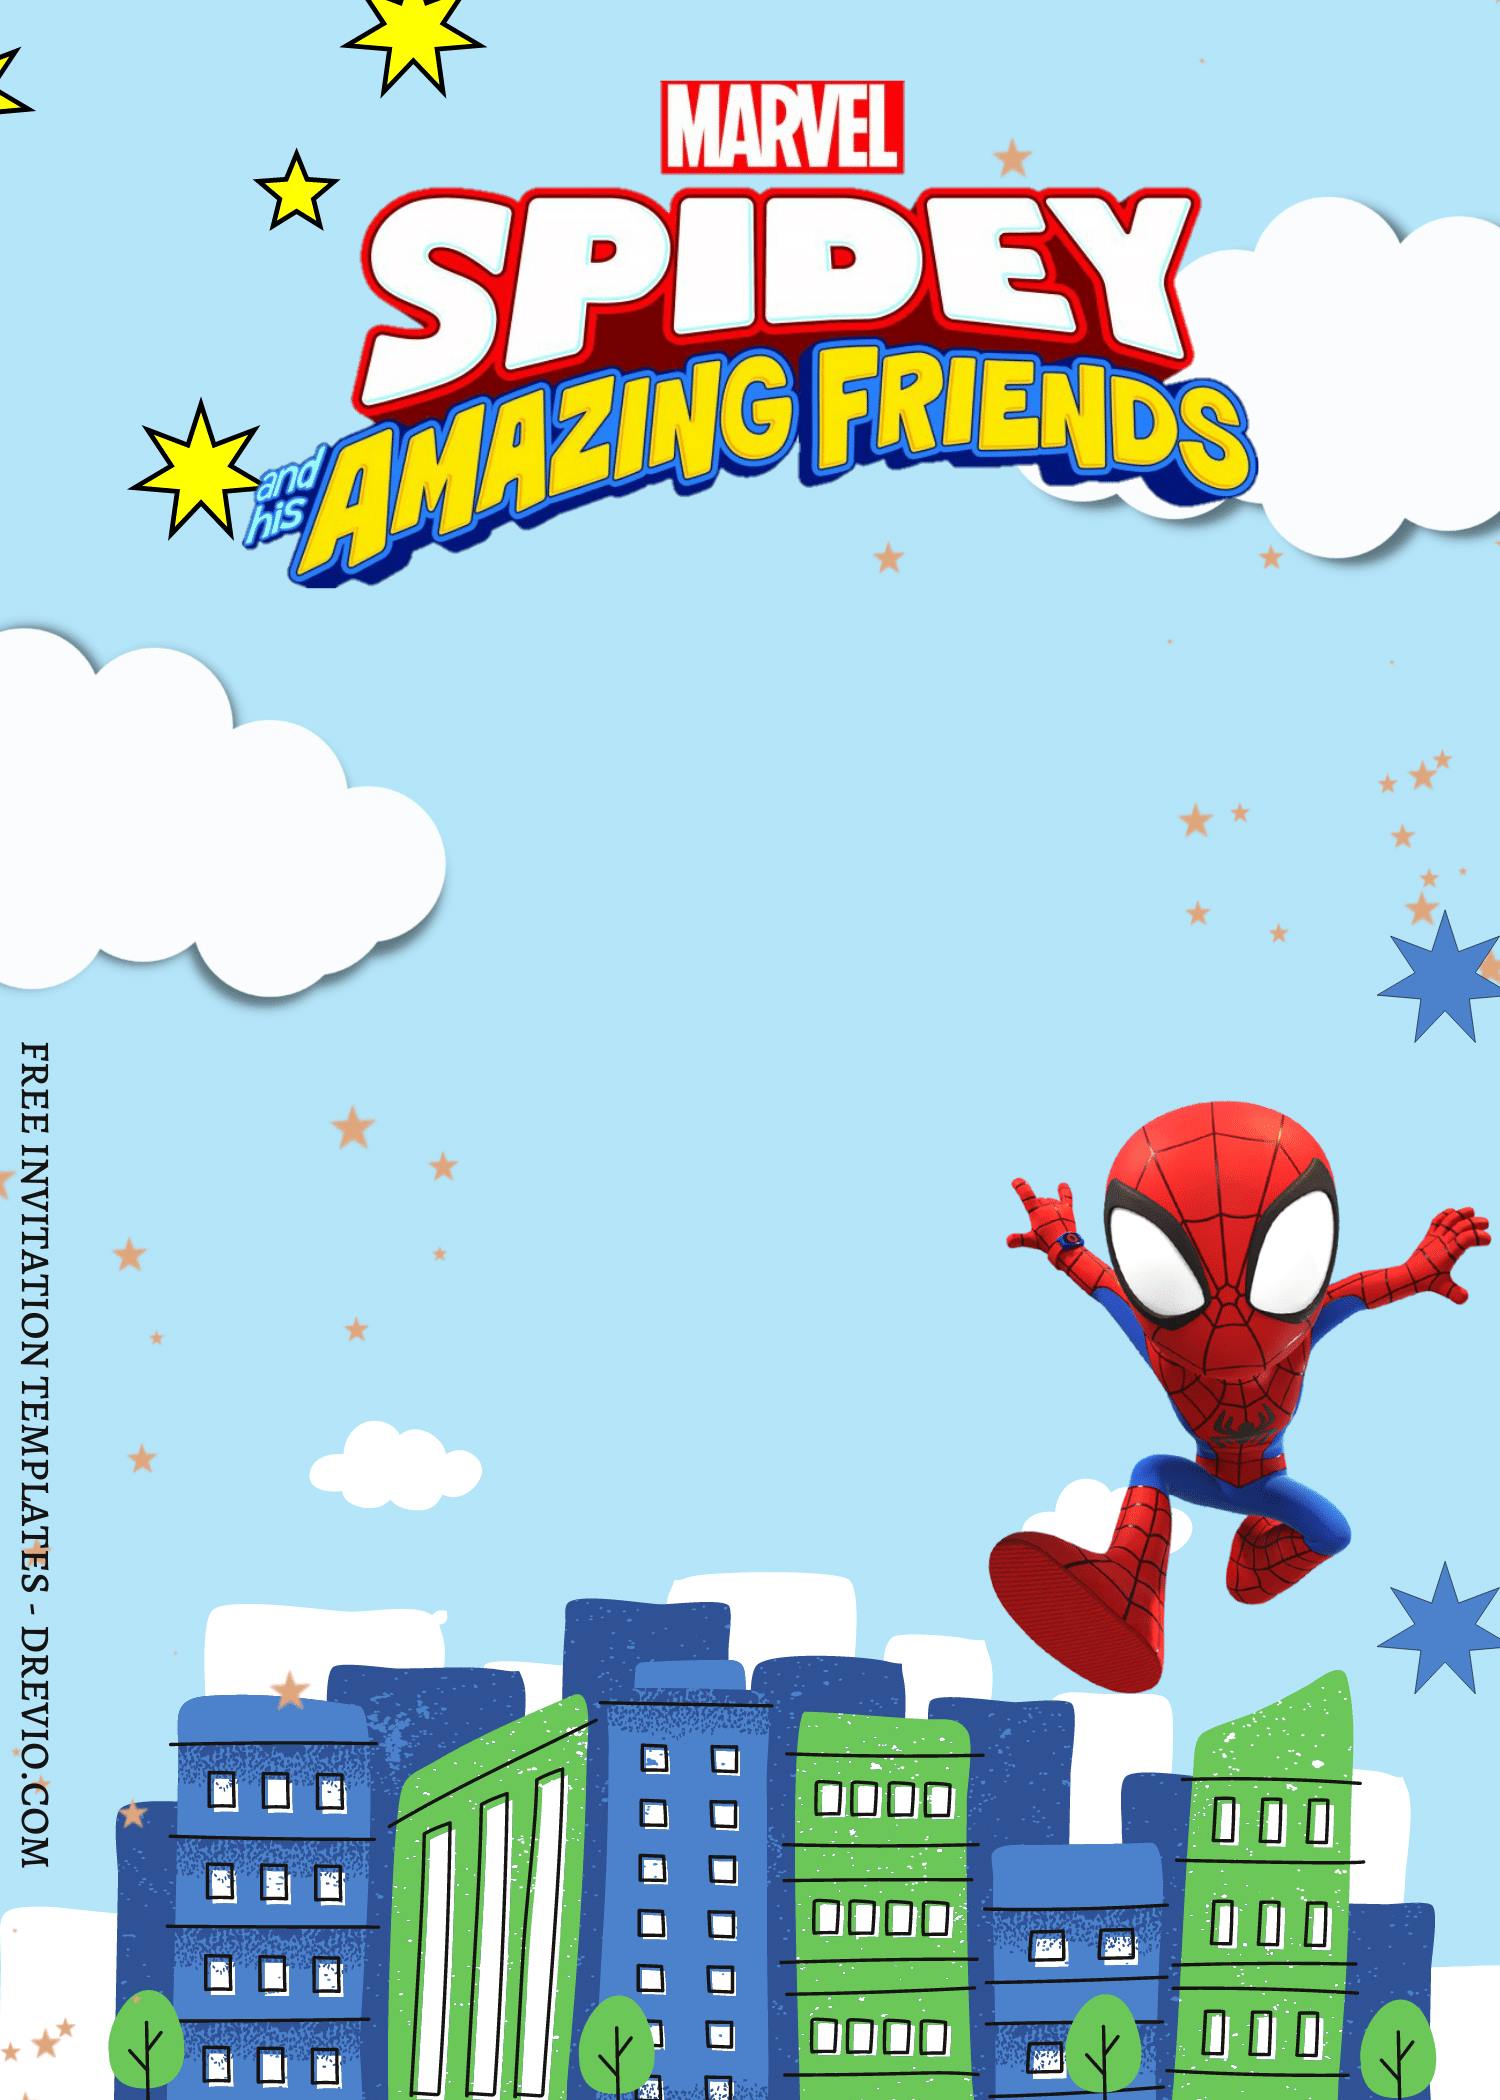 spidey-and-his-amazing-friends-invitation-template